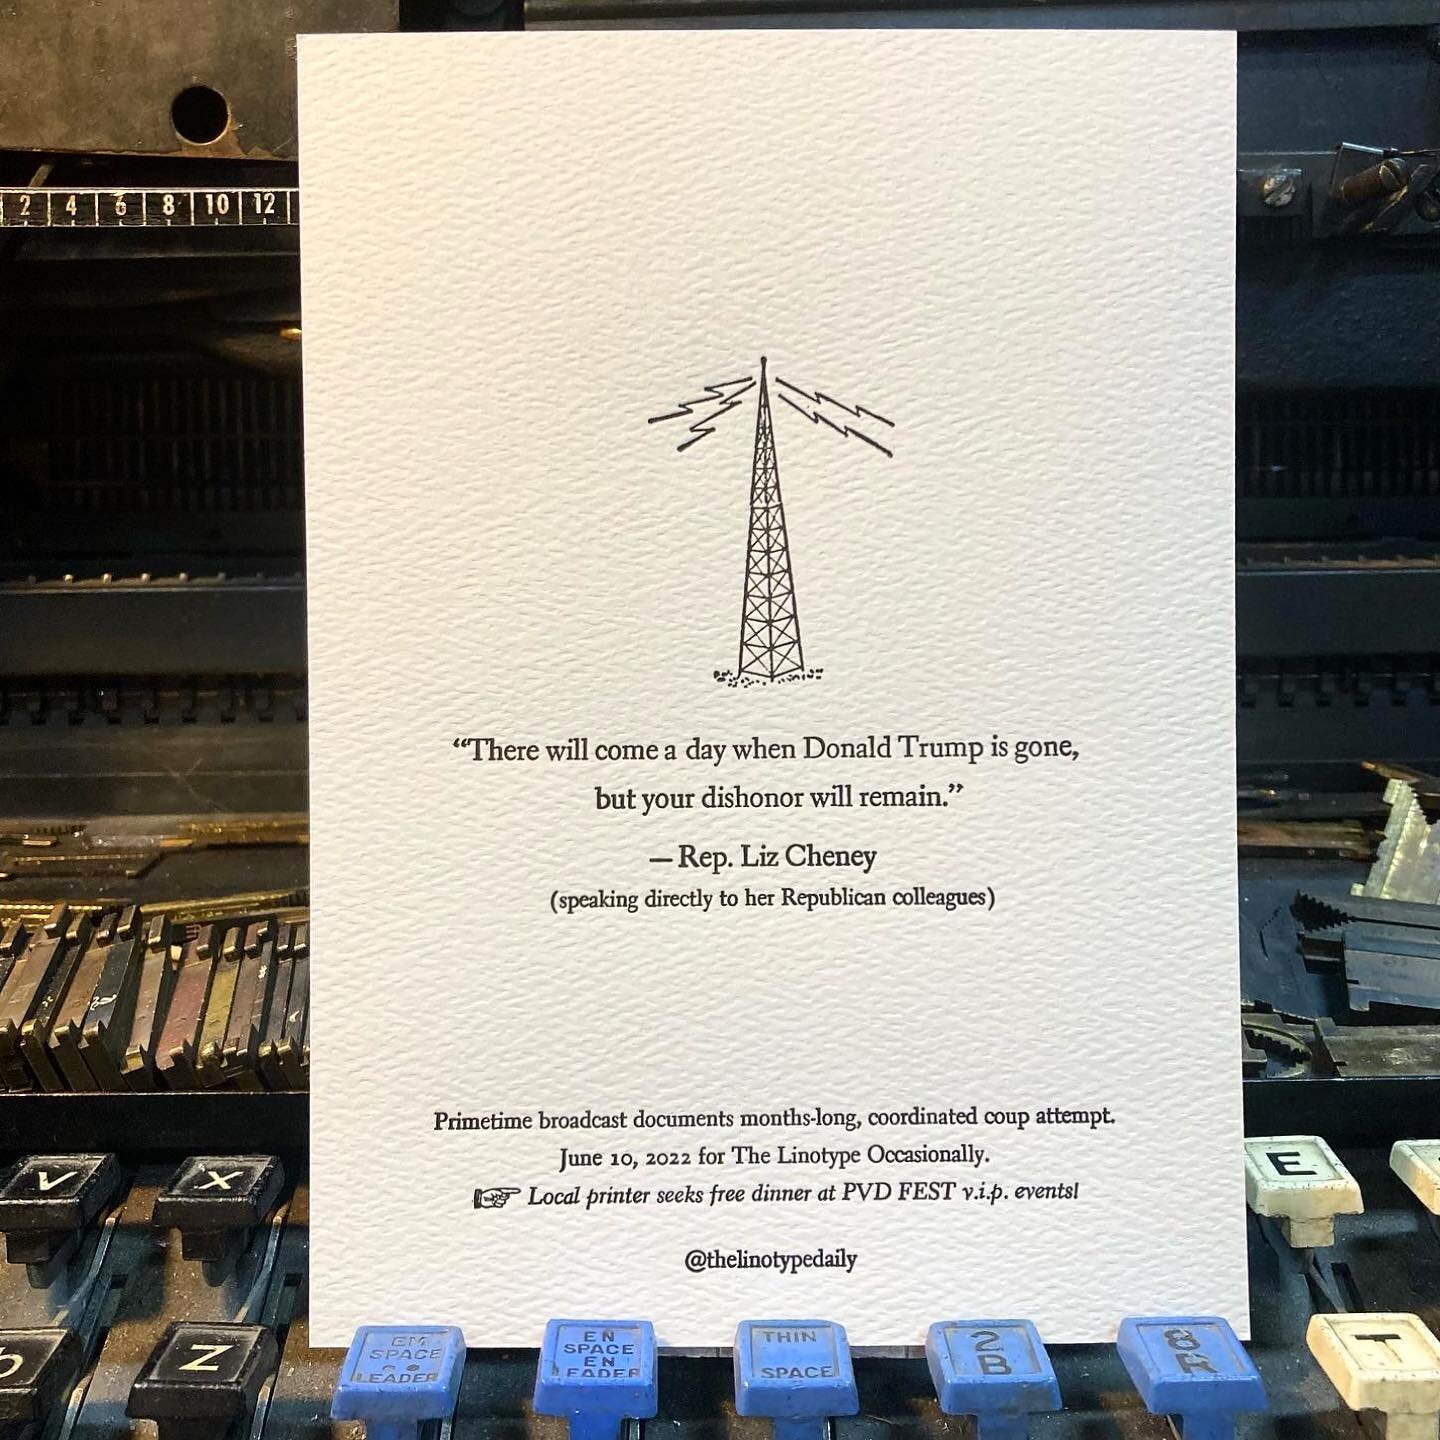 &ldquo;What I saw was a war&hellip; it was carnage&rdquo;

&mdash; US Capitol Police Officer Caroline Edwards, testifying at the Jan 6 hearings last night. #linotype #letterpress #linotypemachine #jan6commission #coupattempt #republicanshavenoshame #